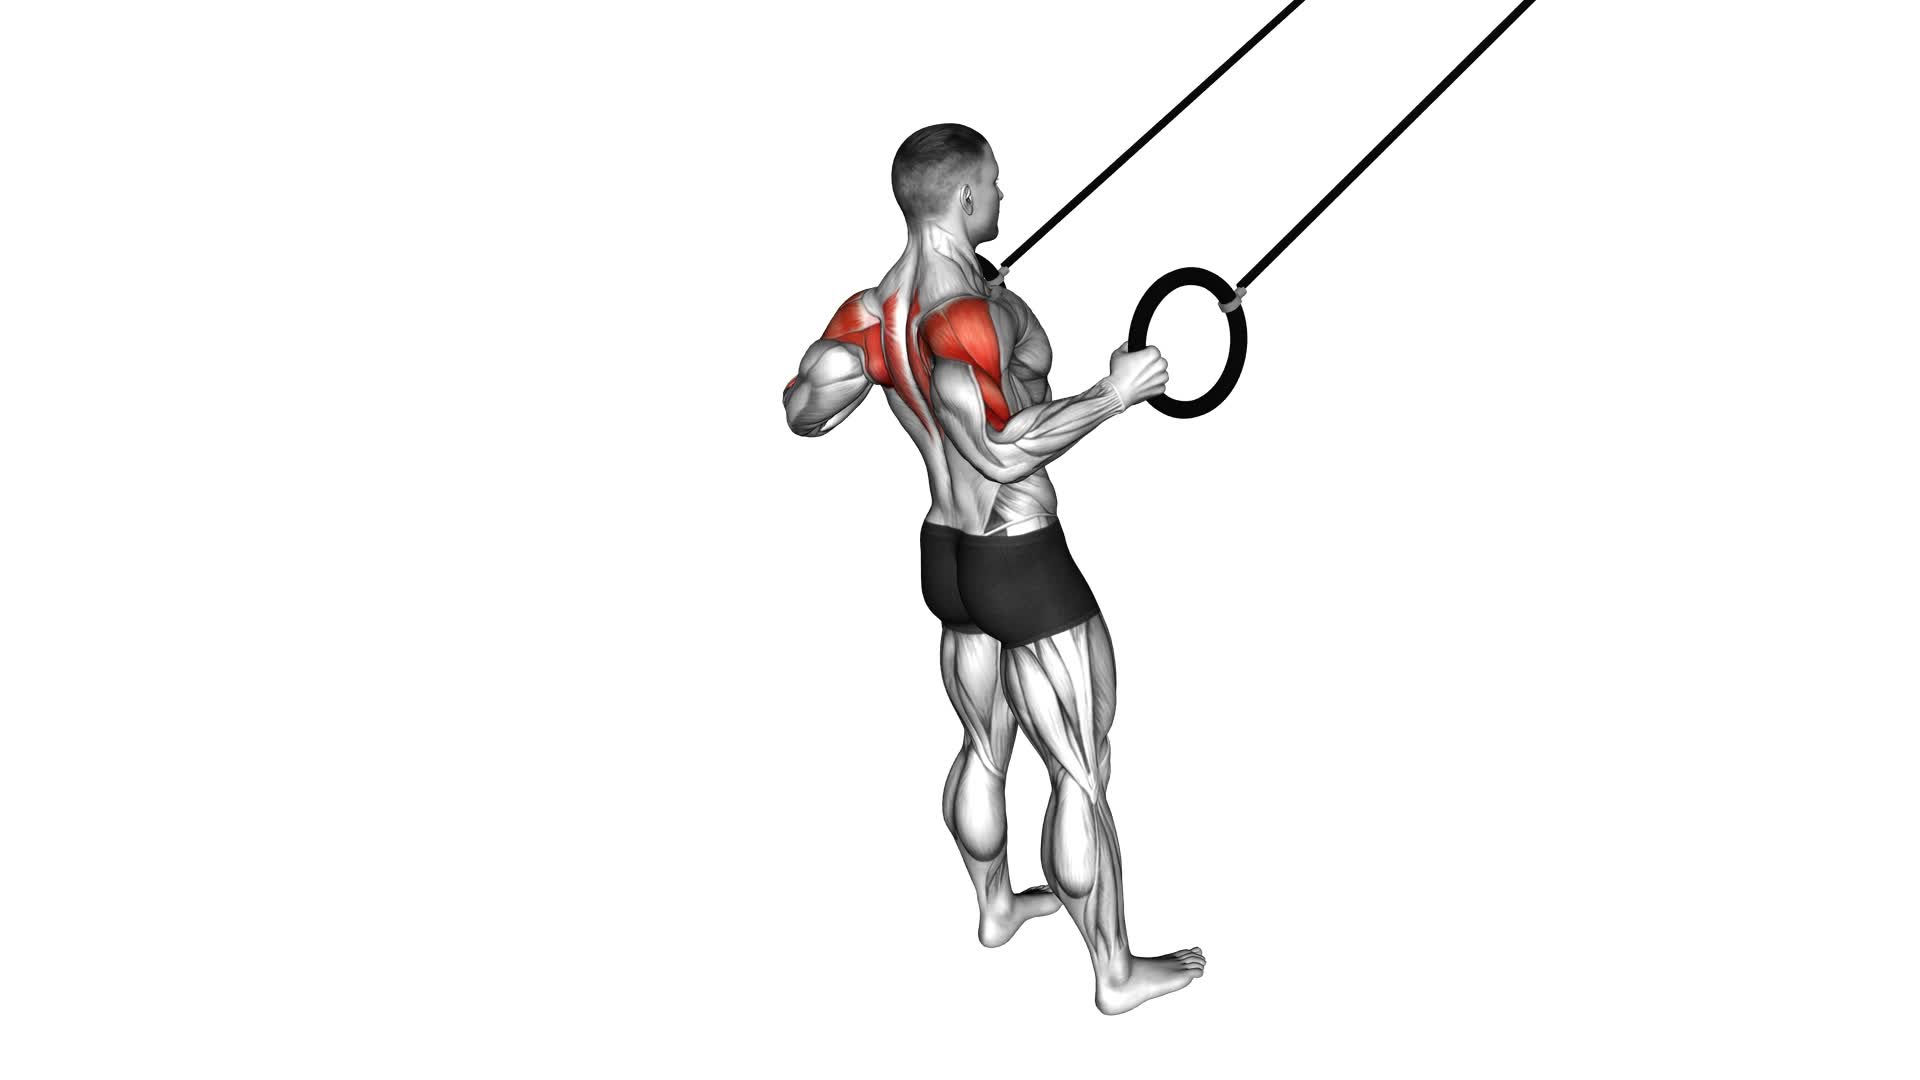 Ring Rear Delt Row (male) - Video Exercise Guide & Tips